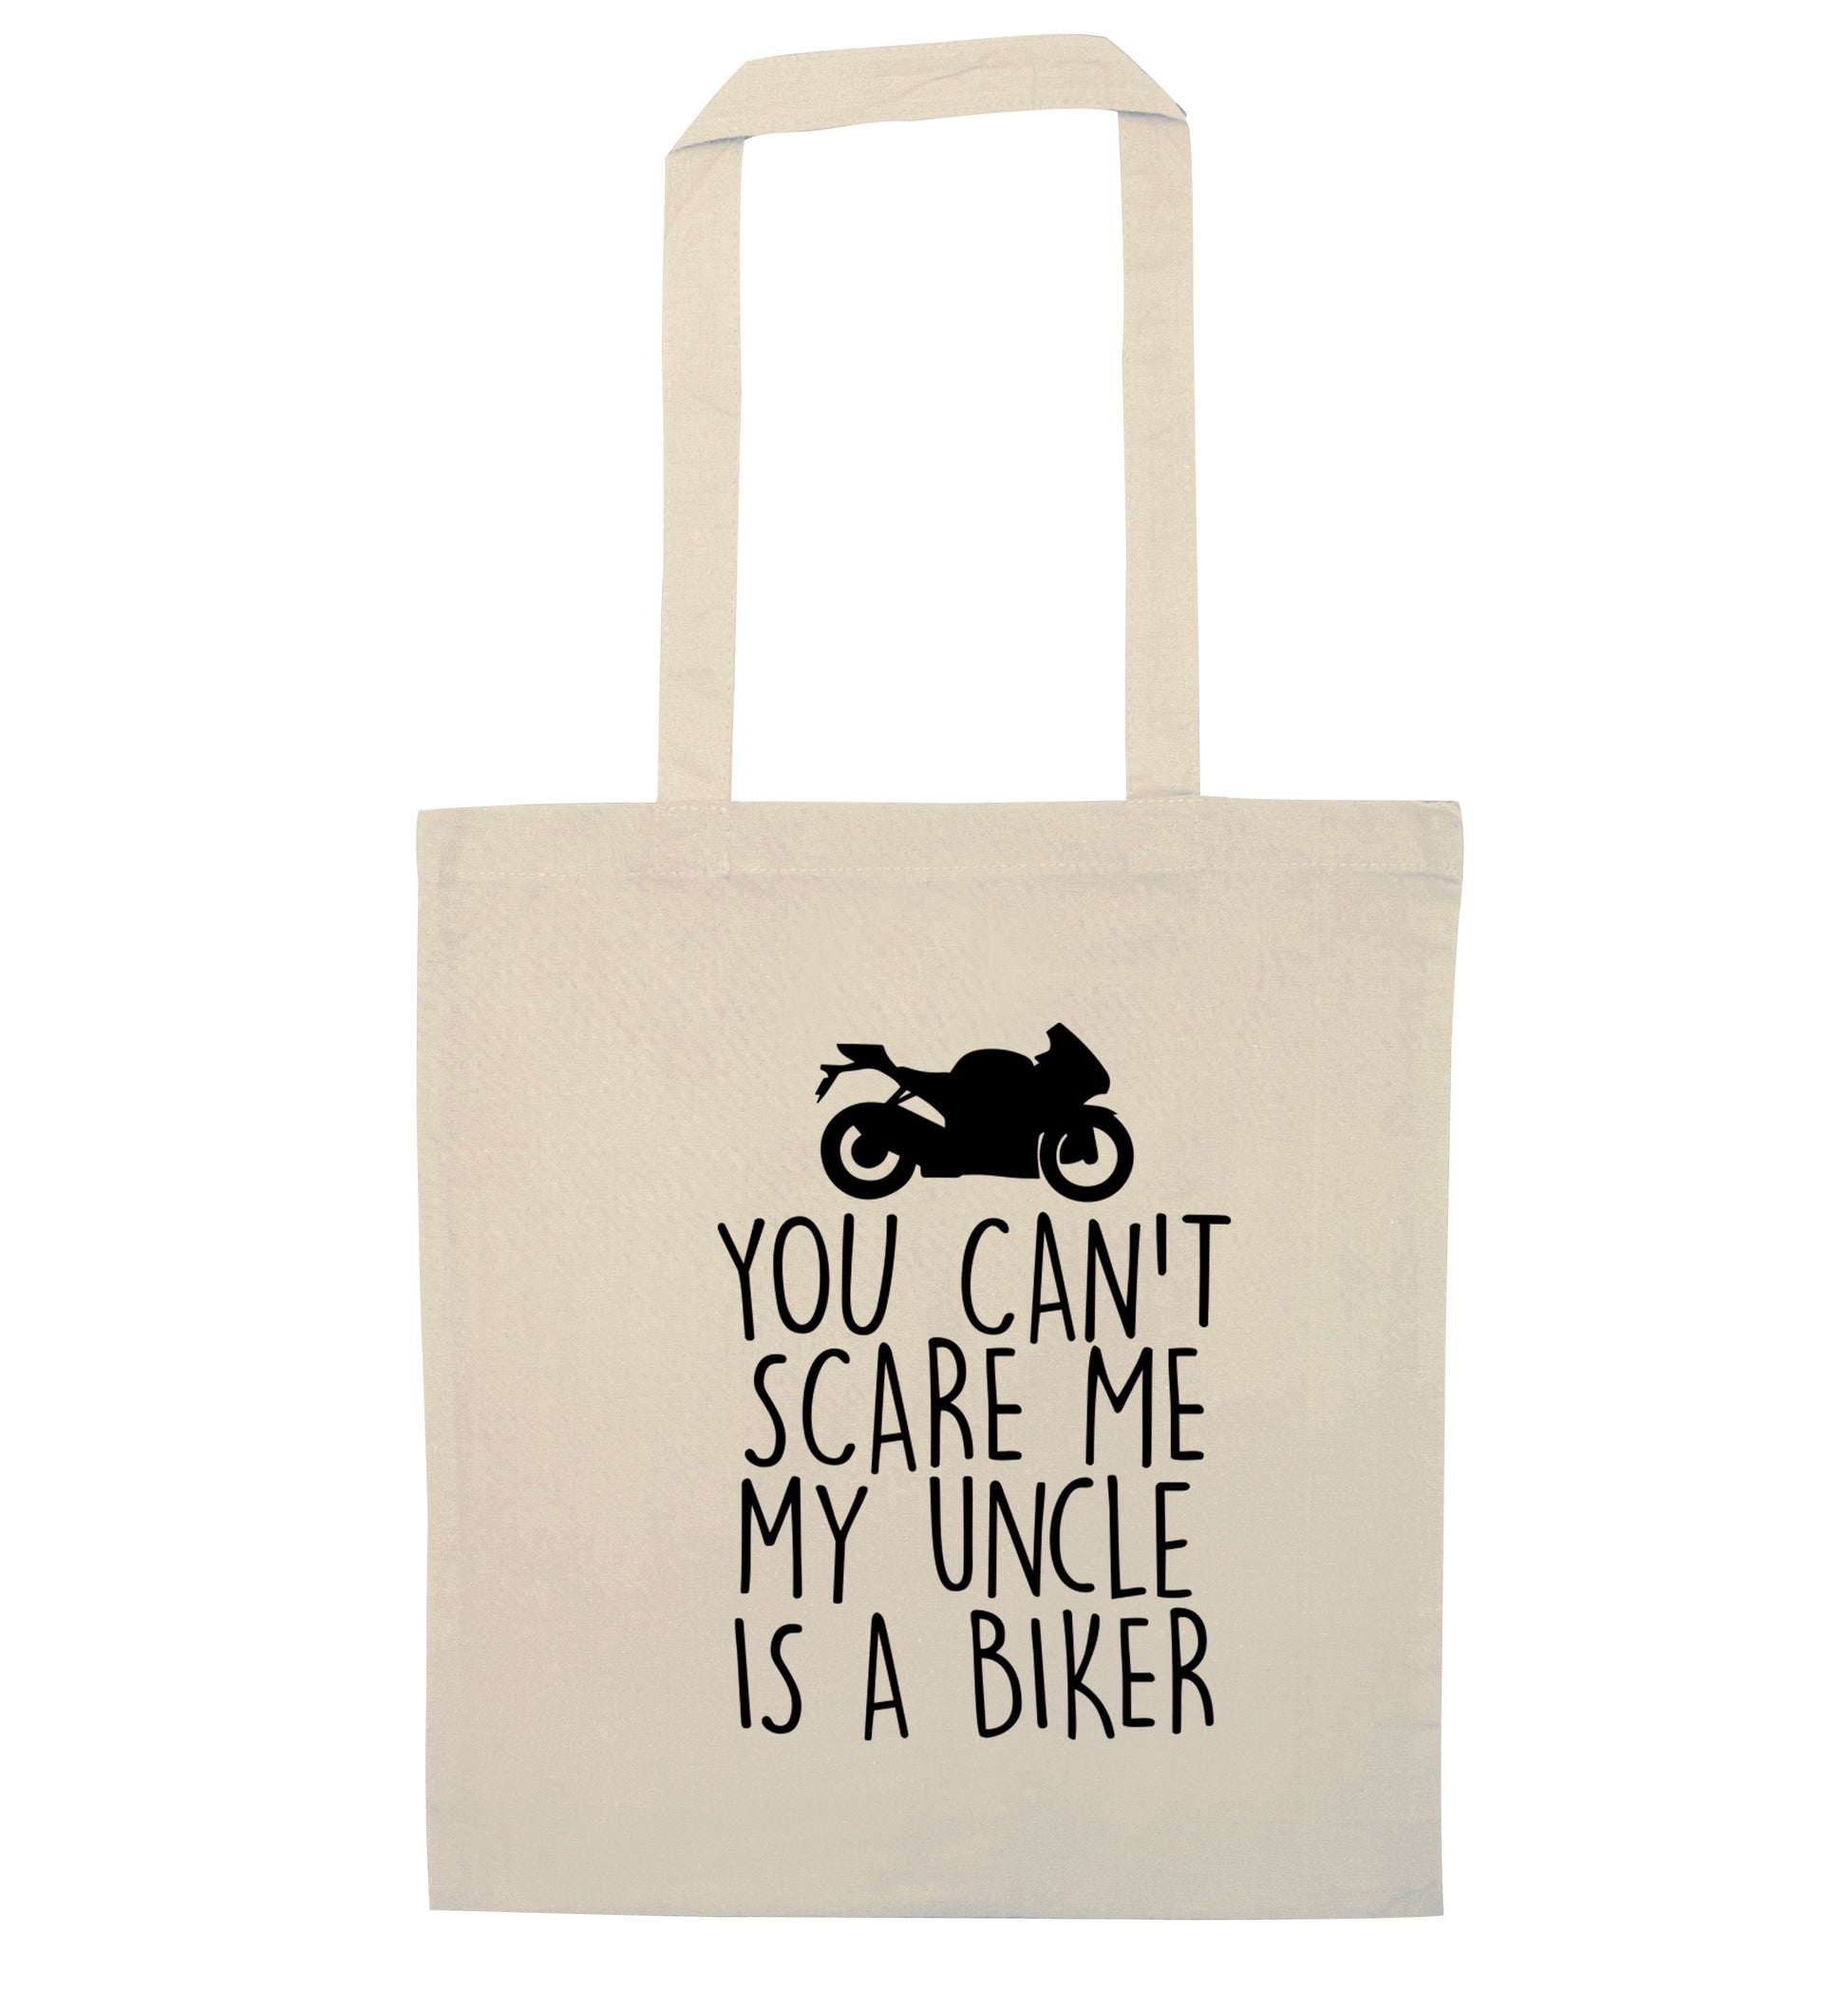 You can't scare me my uncle is a biker natural tote bag